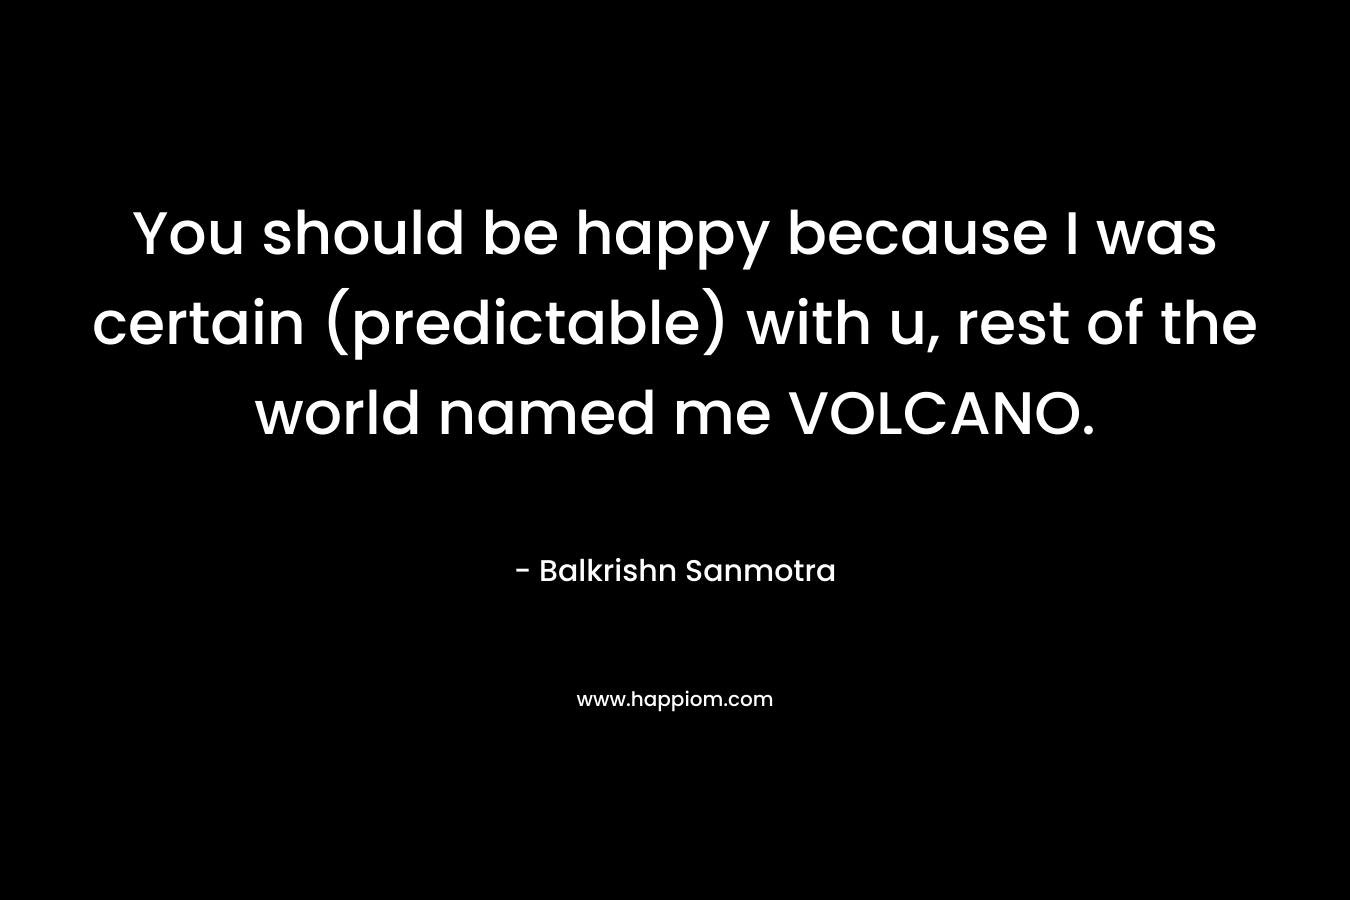 You should be happy because I was certain (predictable) with u, rest of the world named me VOLCANO. – Balkrishn Sanmotra